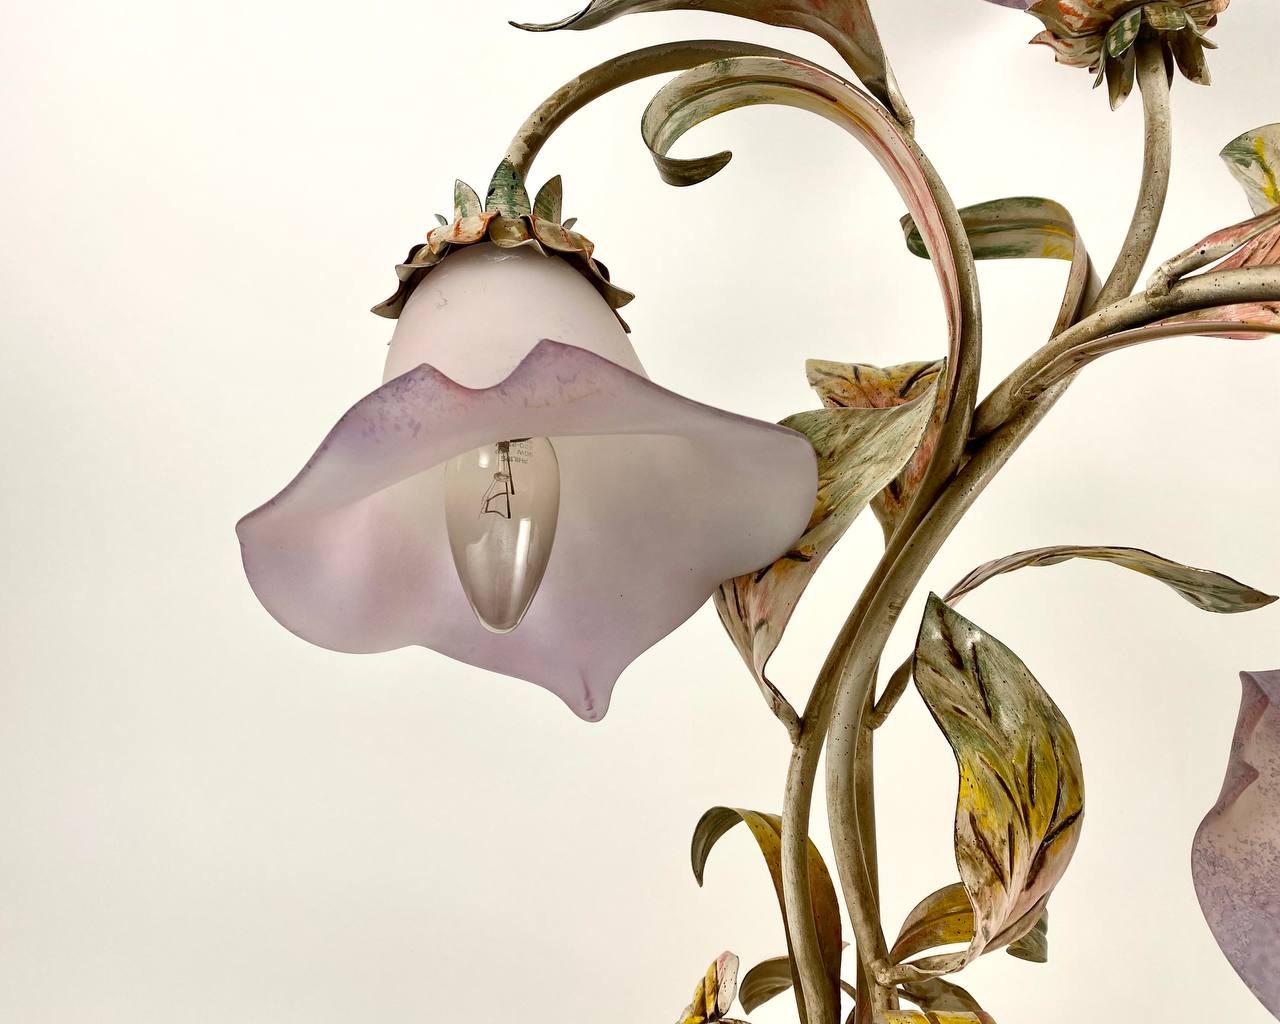 flower shaped lamps